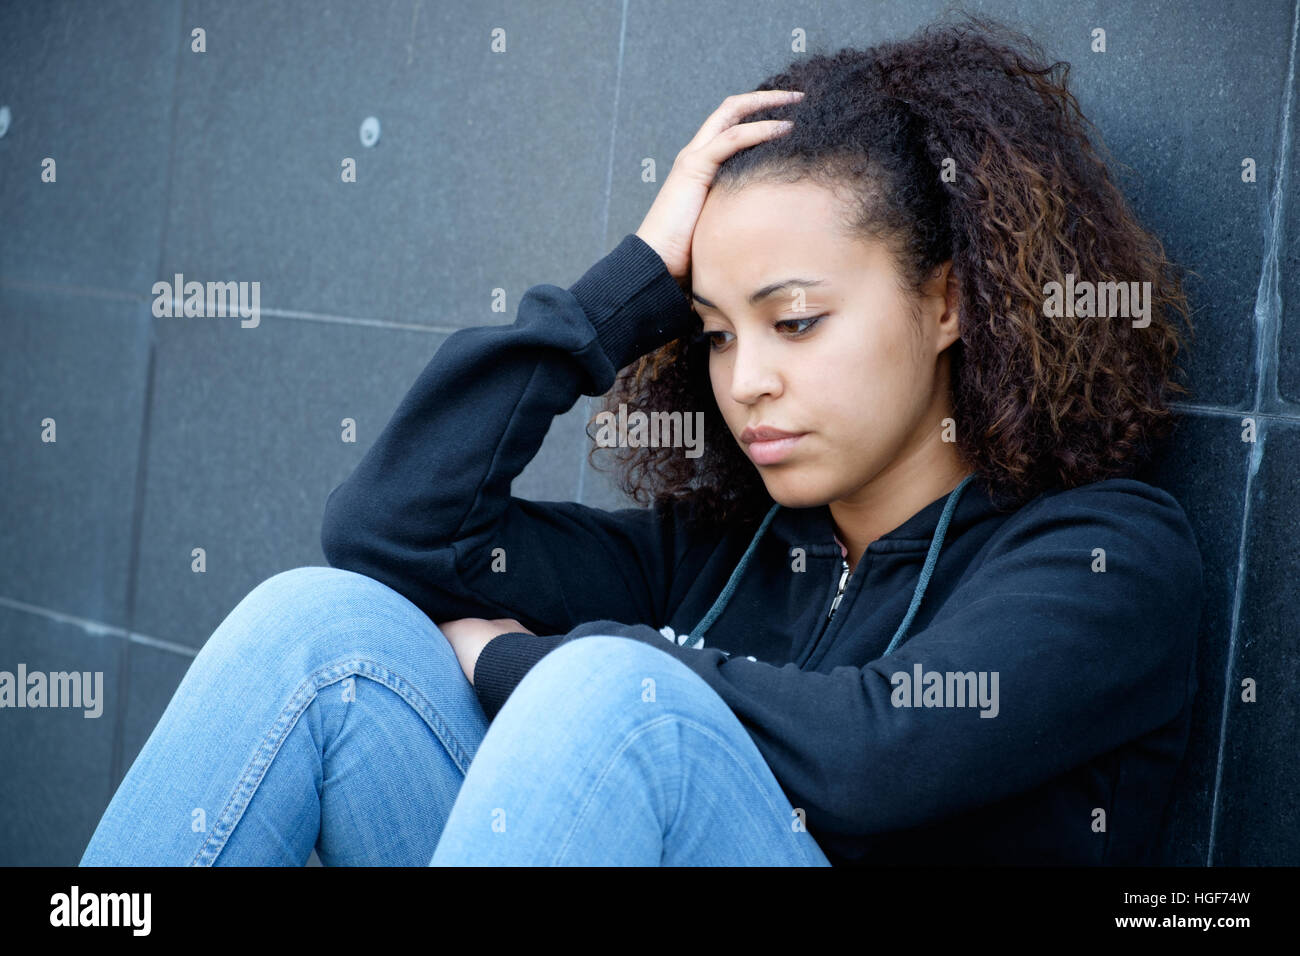 Sad and lonely teenager portrait in the city street Stock Photo